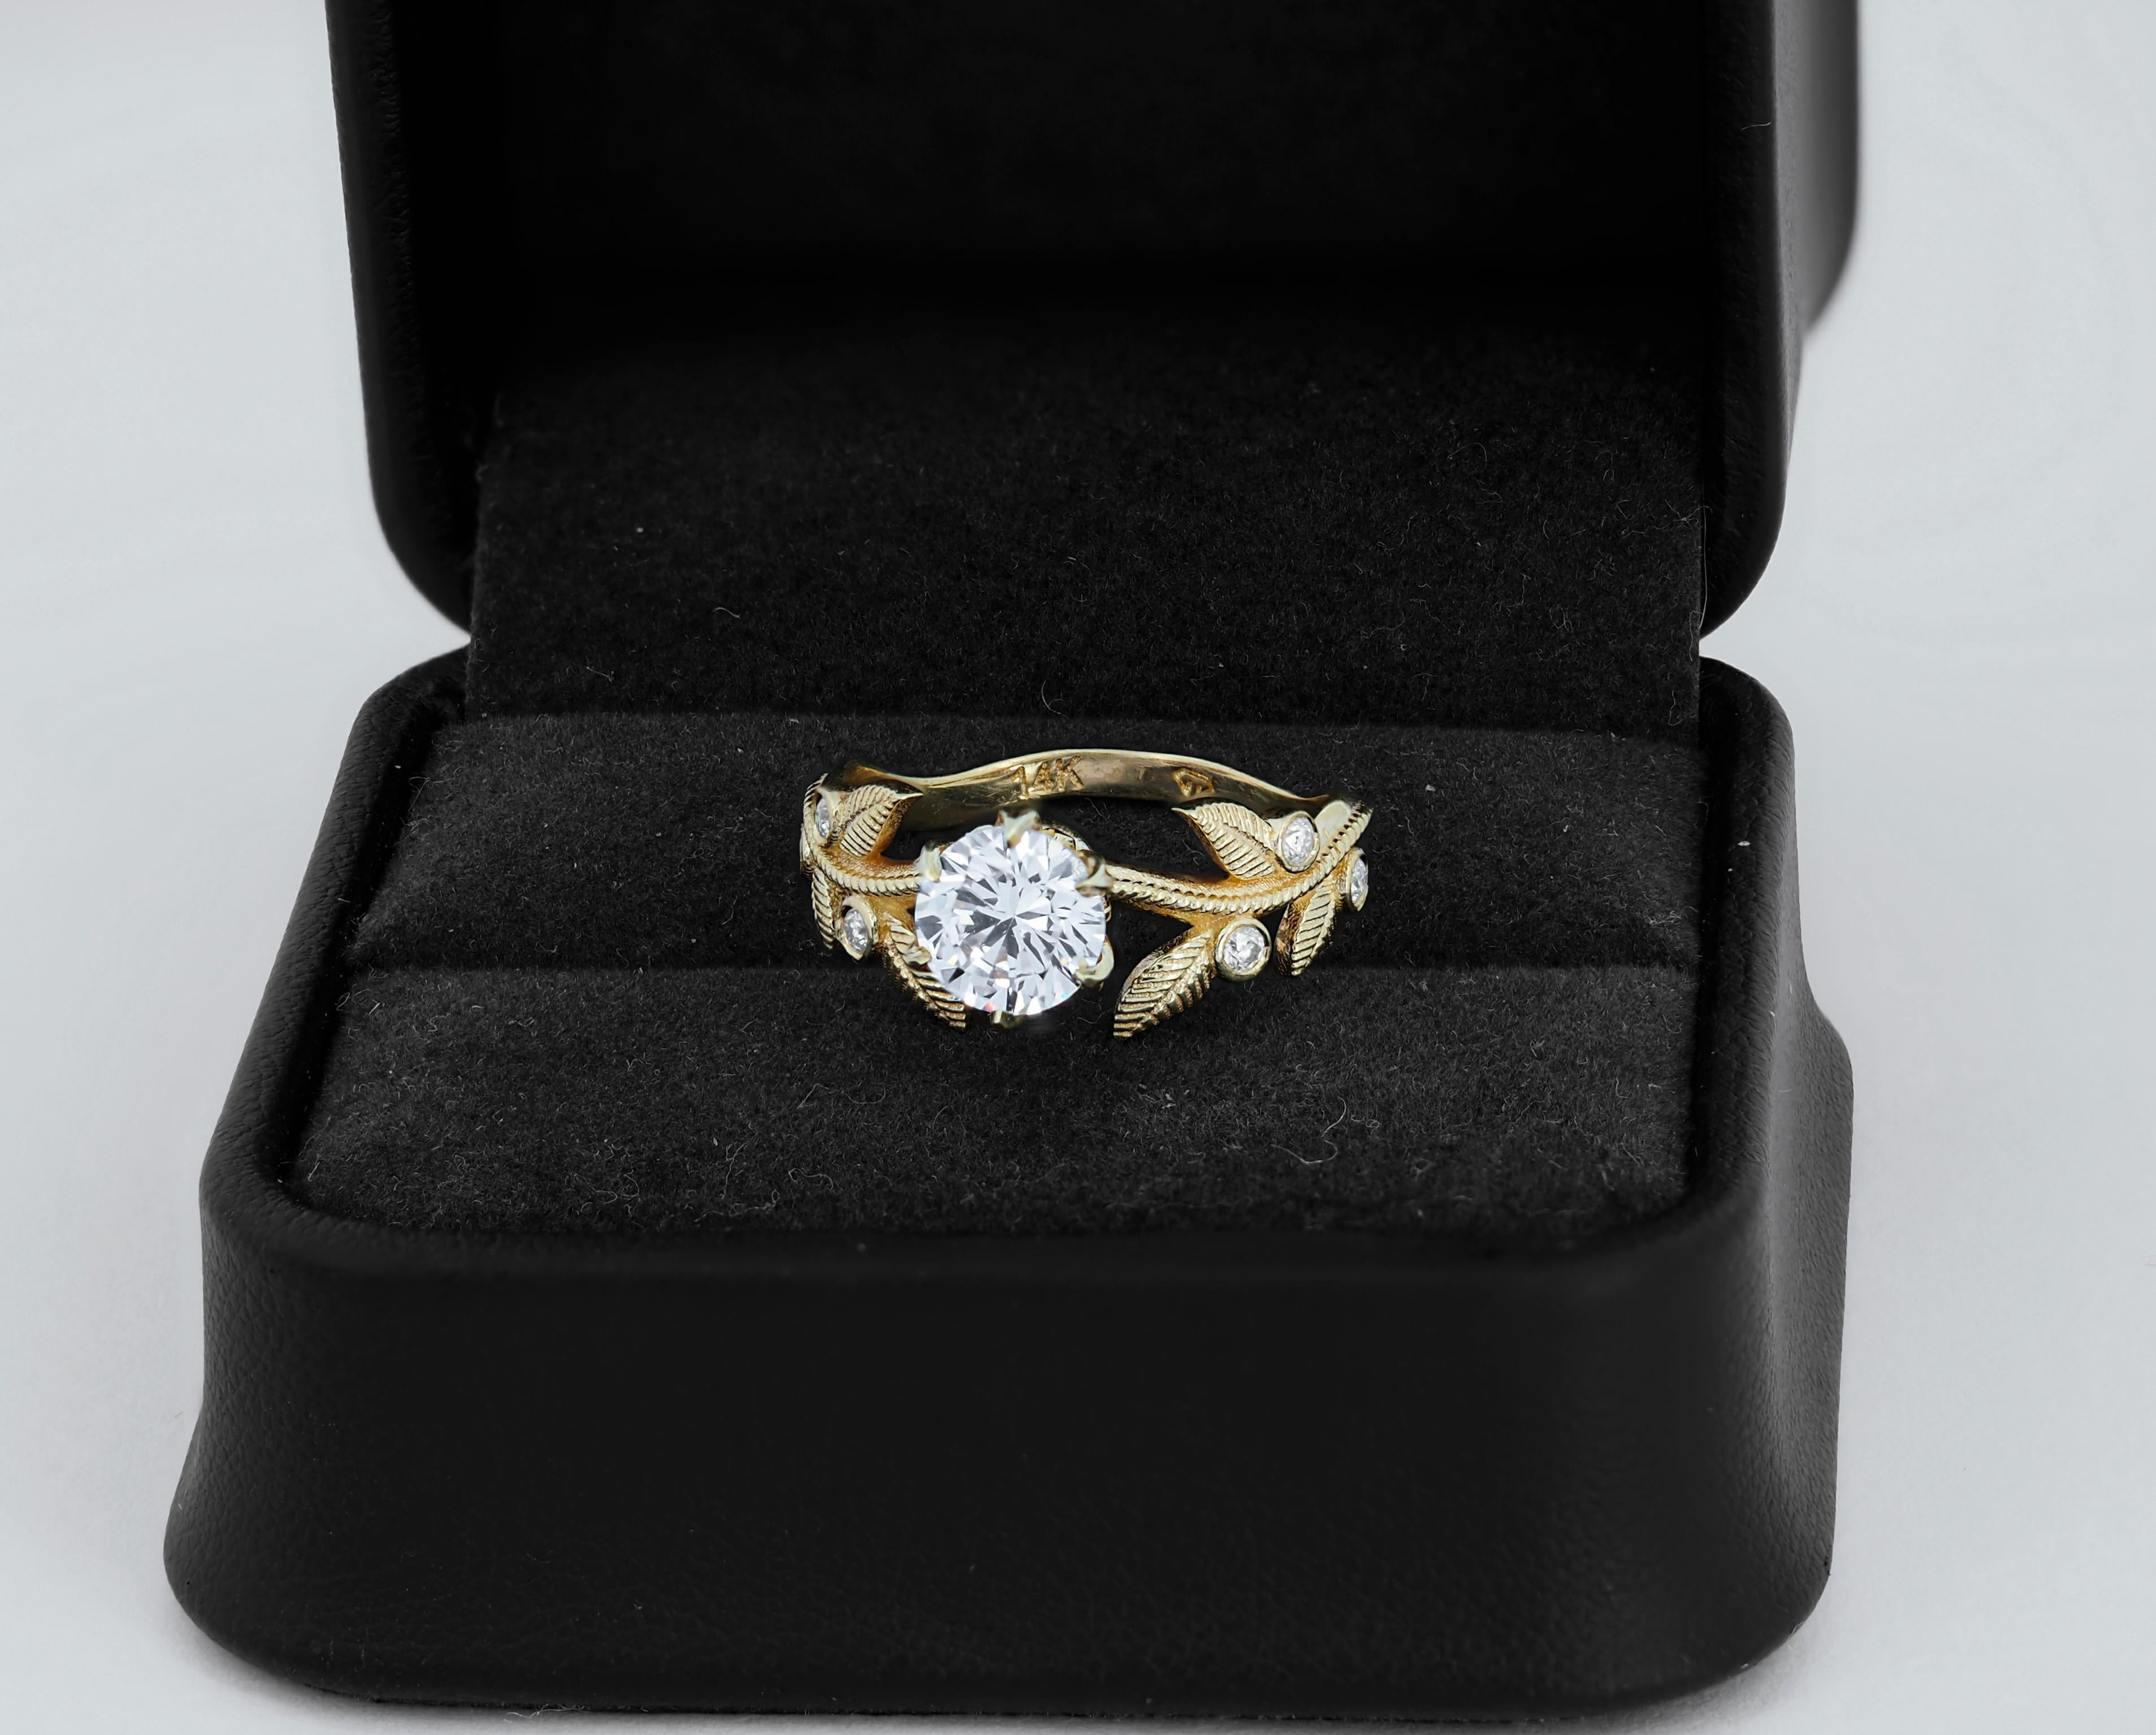 Flora engagement ring with with round moissanite in 14k gold. Five prong round diamond cut moissanite ring.  Moissanite engagement ring. Solitaire moissanite ring. Vintage style moissanite ring. 

Metal: 14k gold
Weight: 2 gr depends from